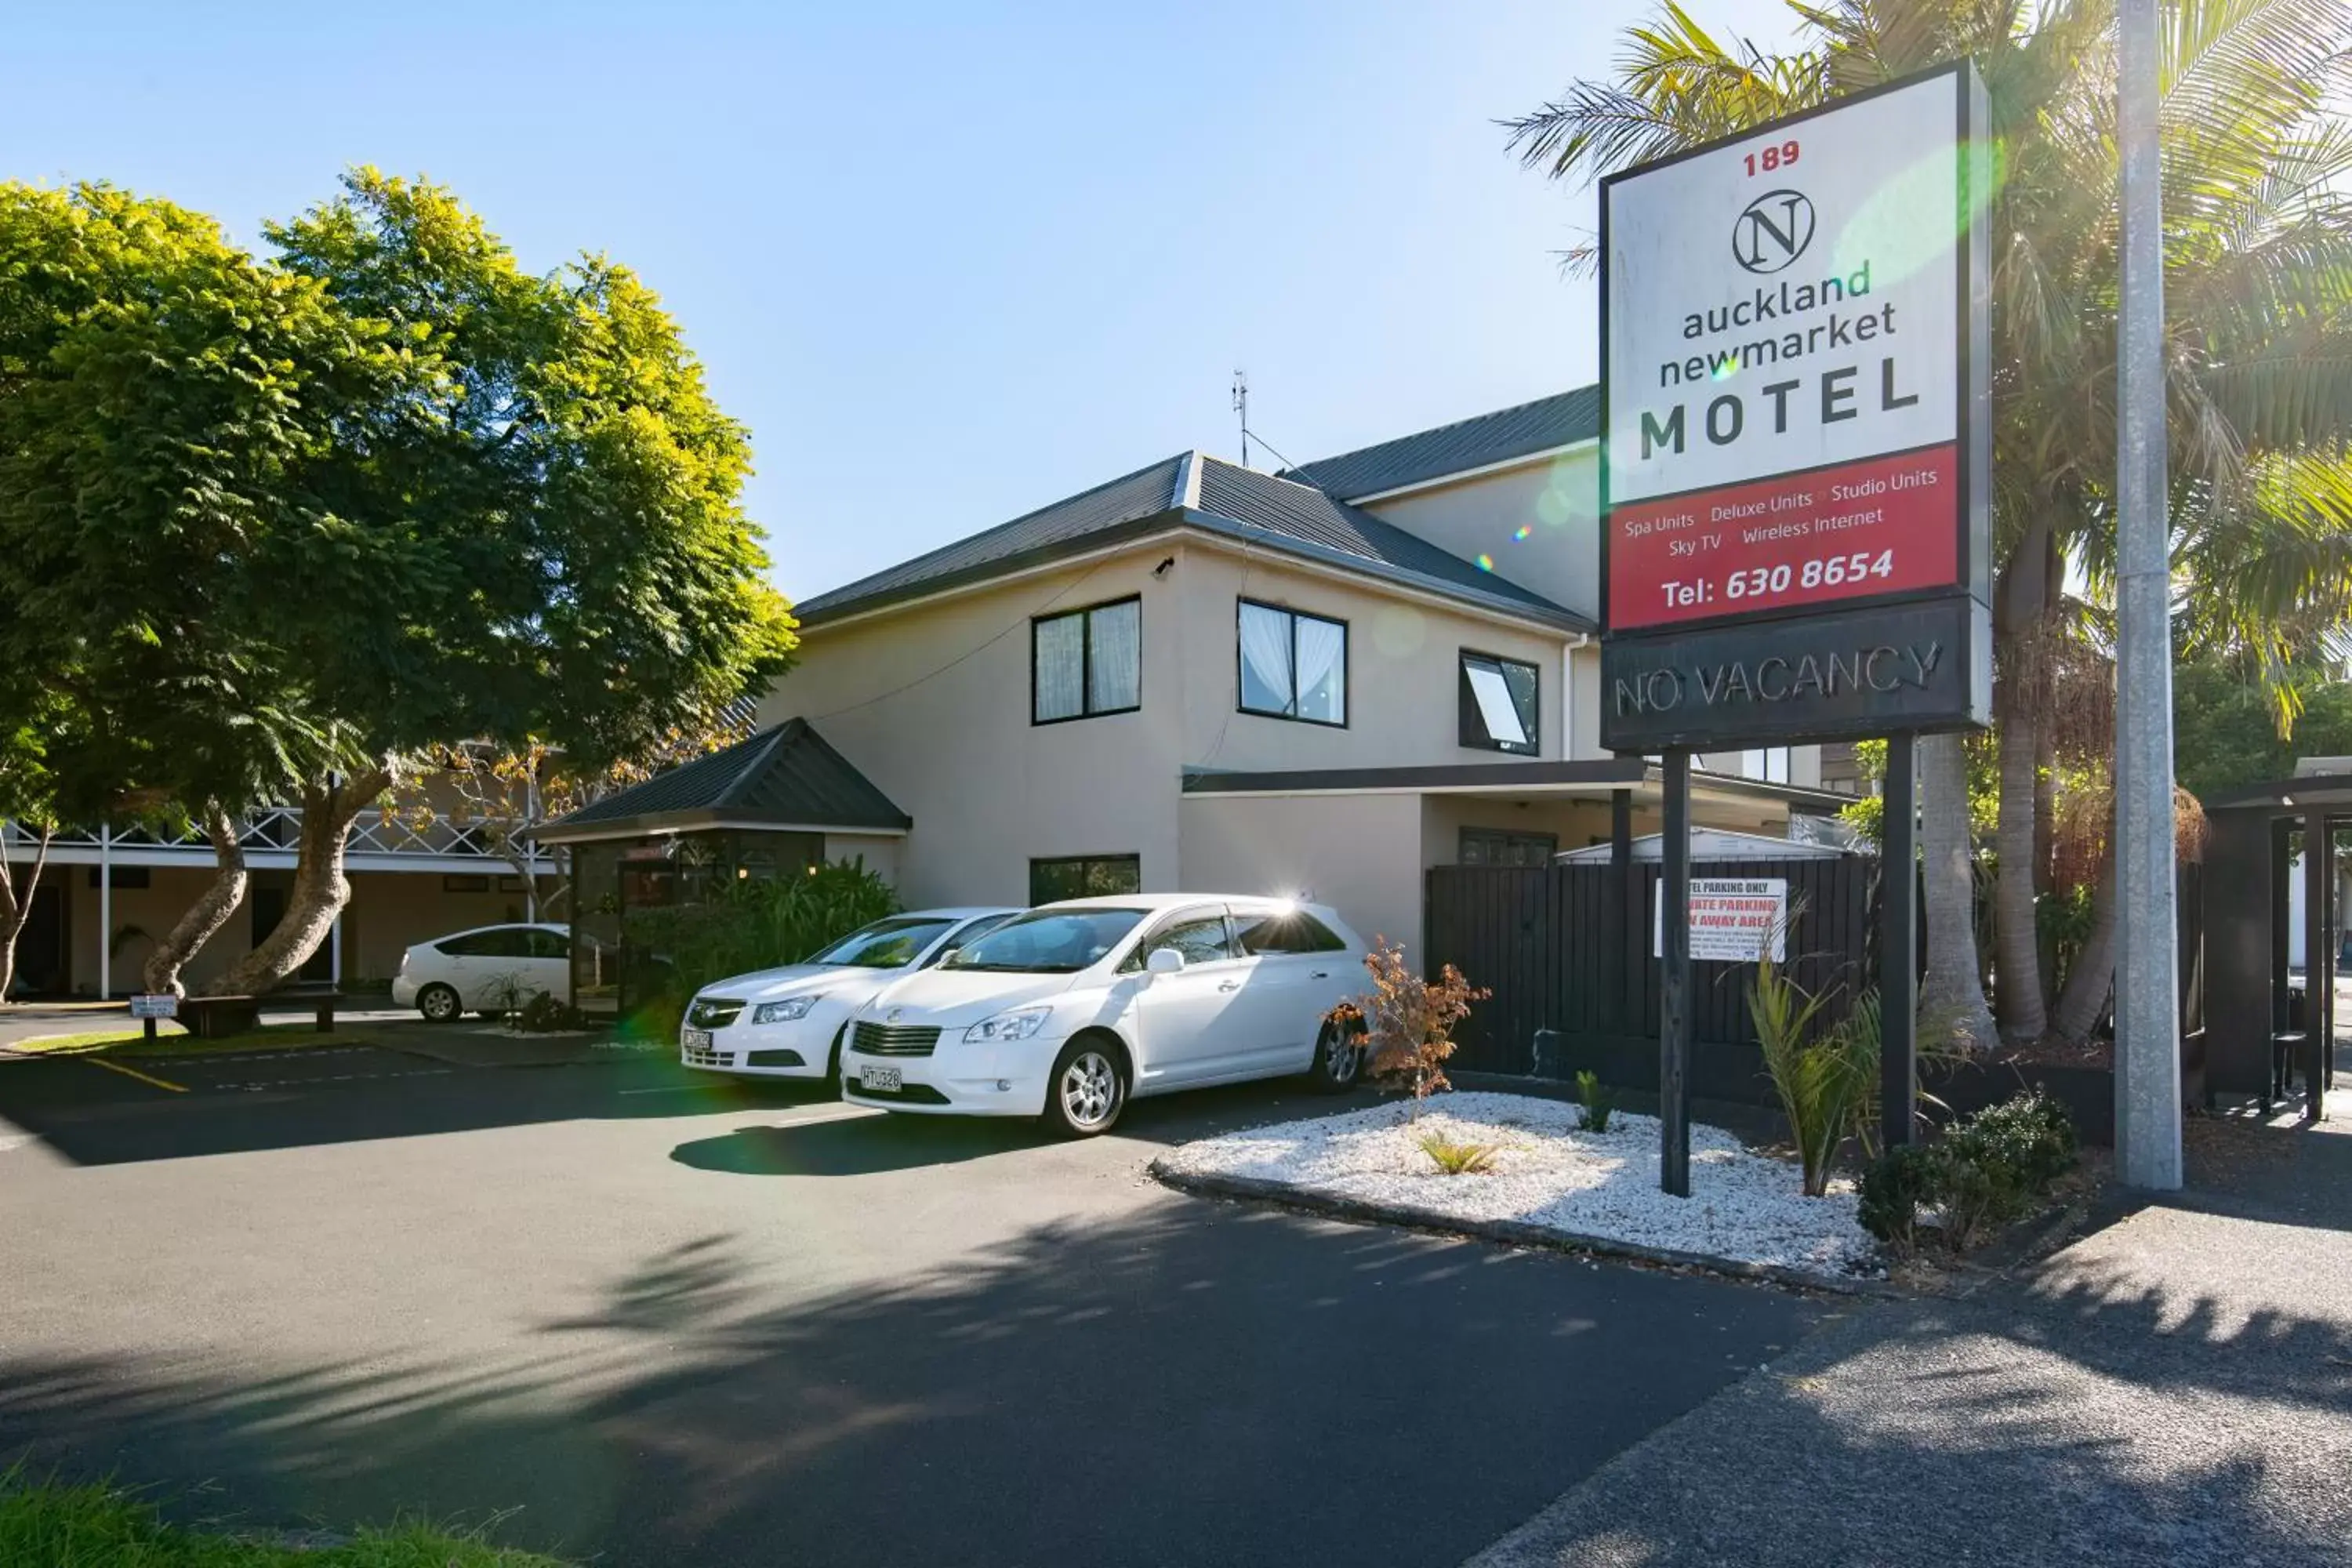 Property Building in Auckland Newmarket Motel